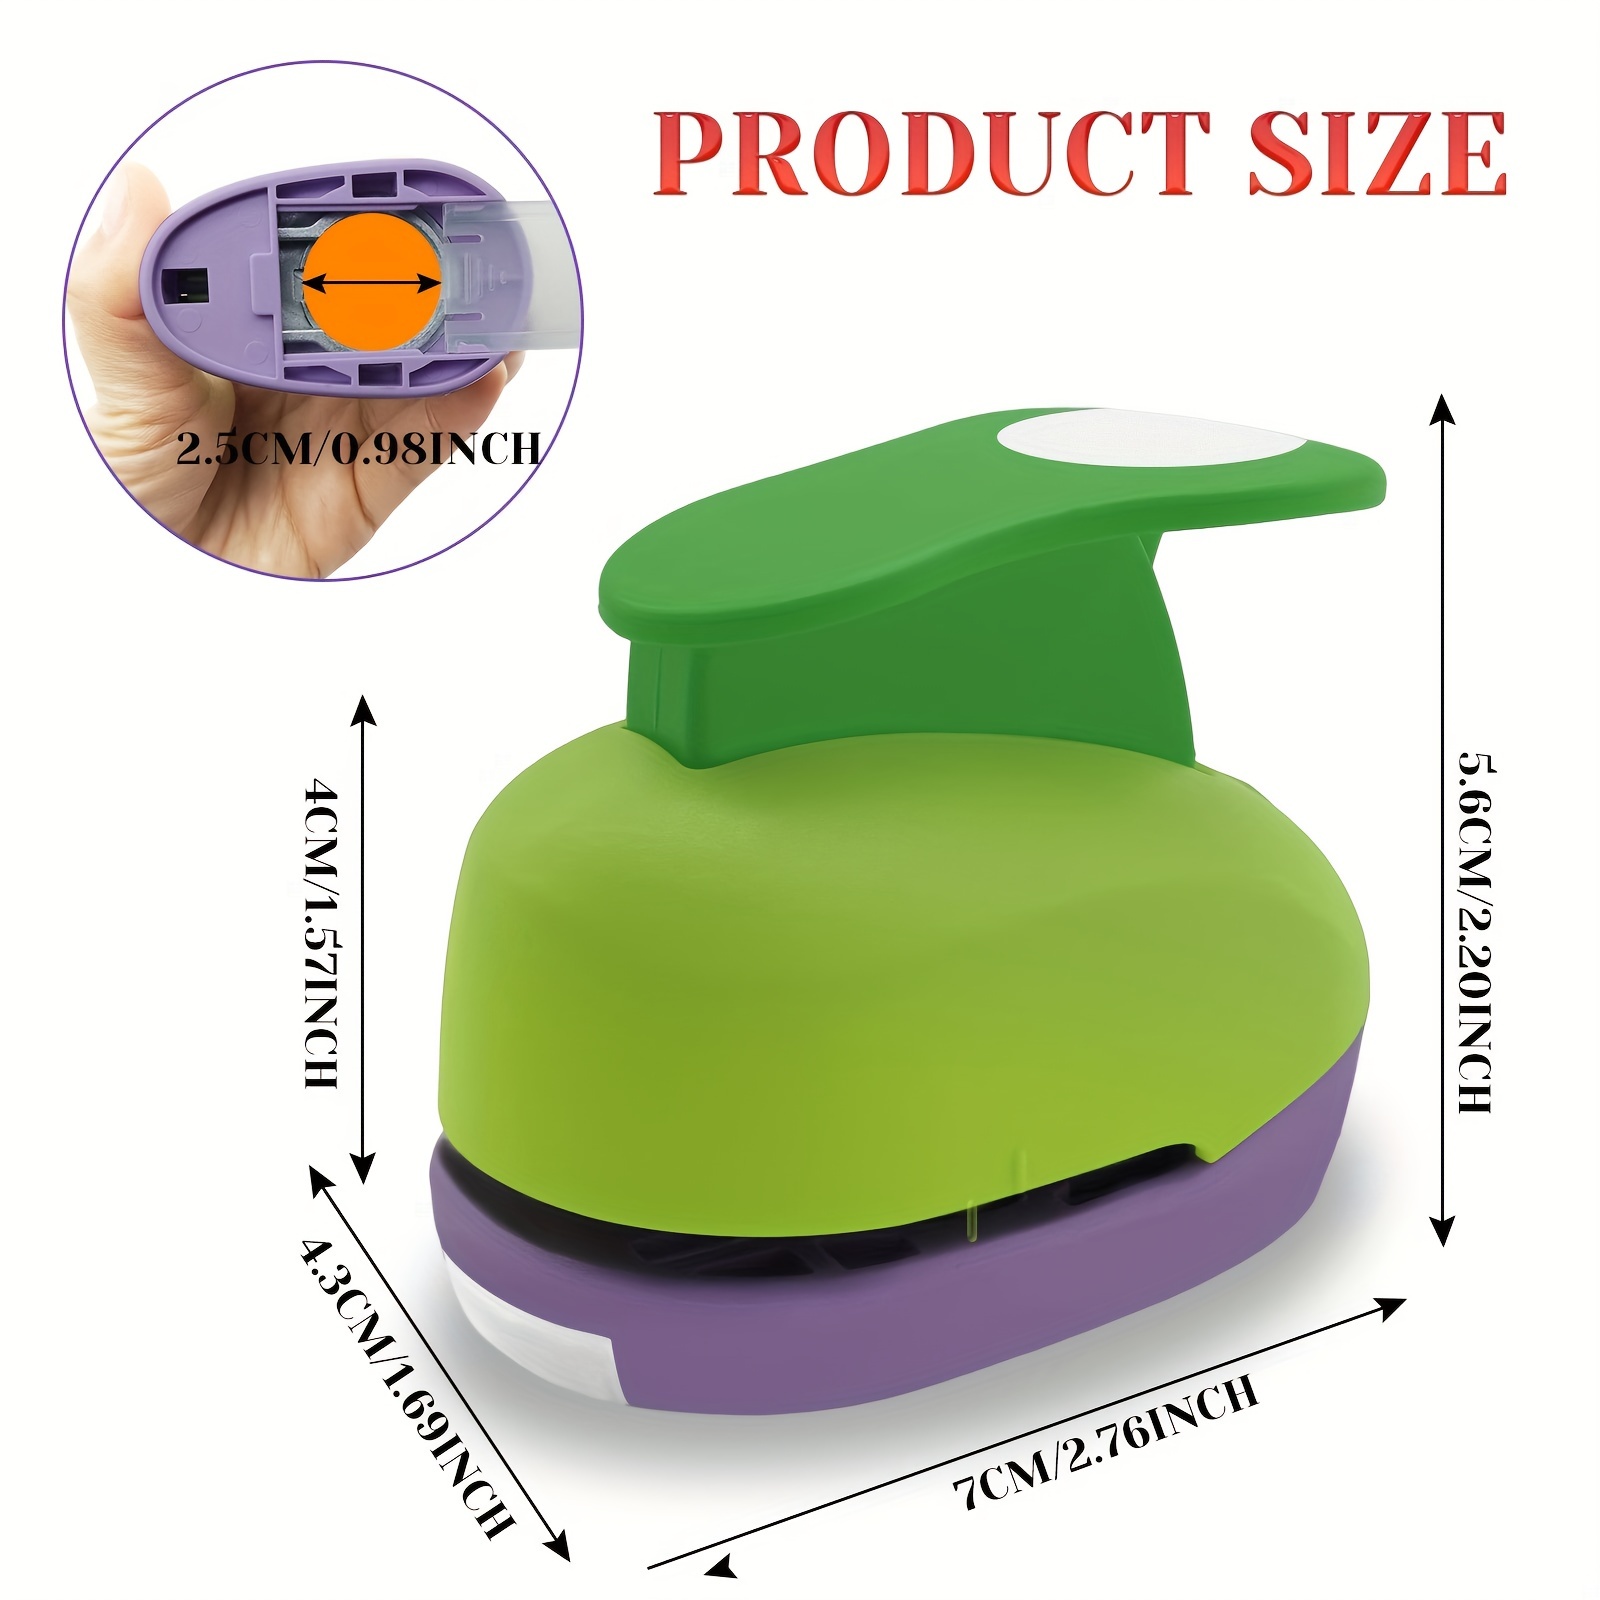 Random Color 1in 2.5cm Big Circle Round Paper Craft Hole Punch